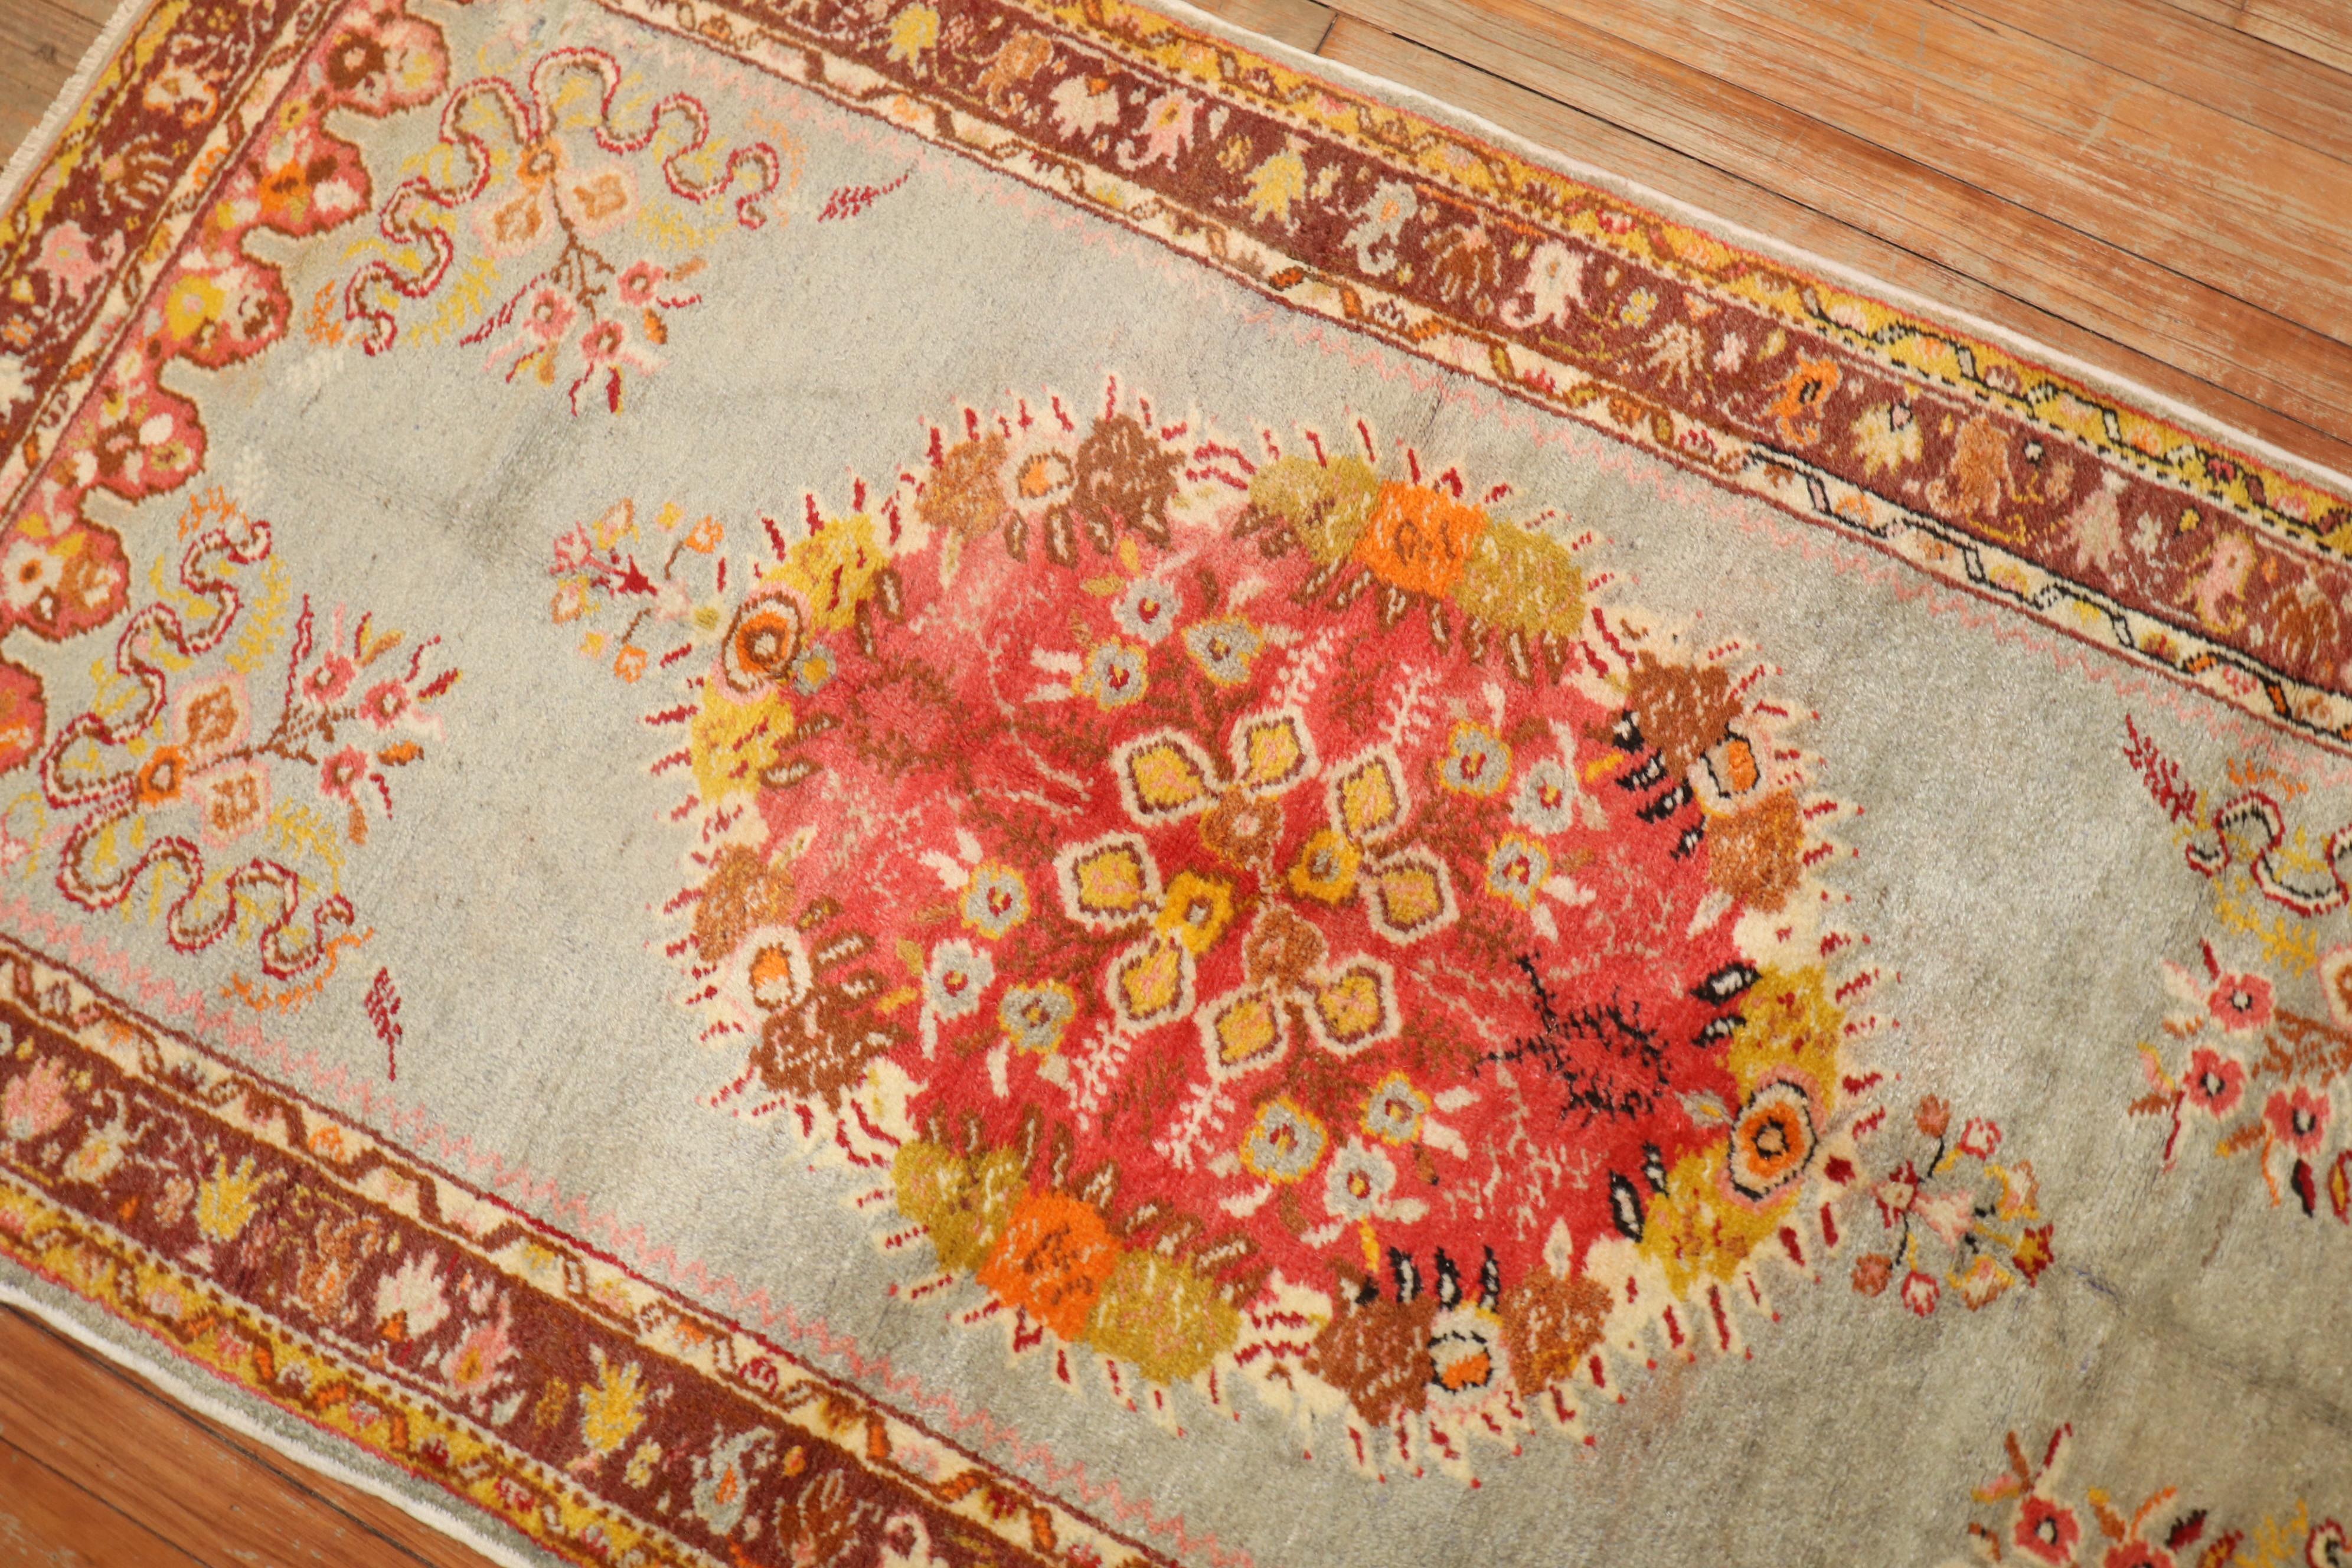 A colorful mid-20th century Turkish rug

Measures: 3'3'' x 6'.